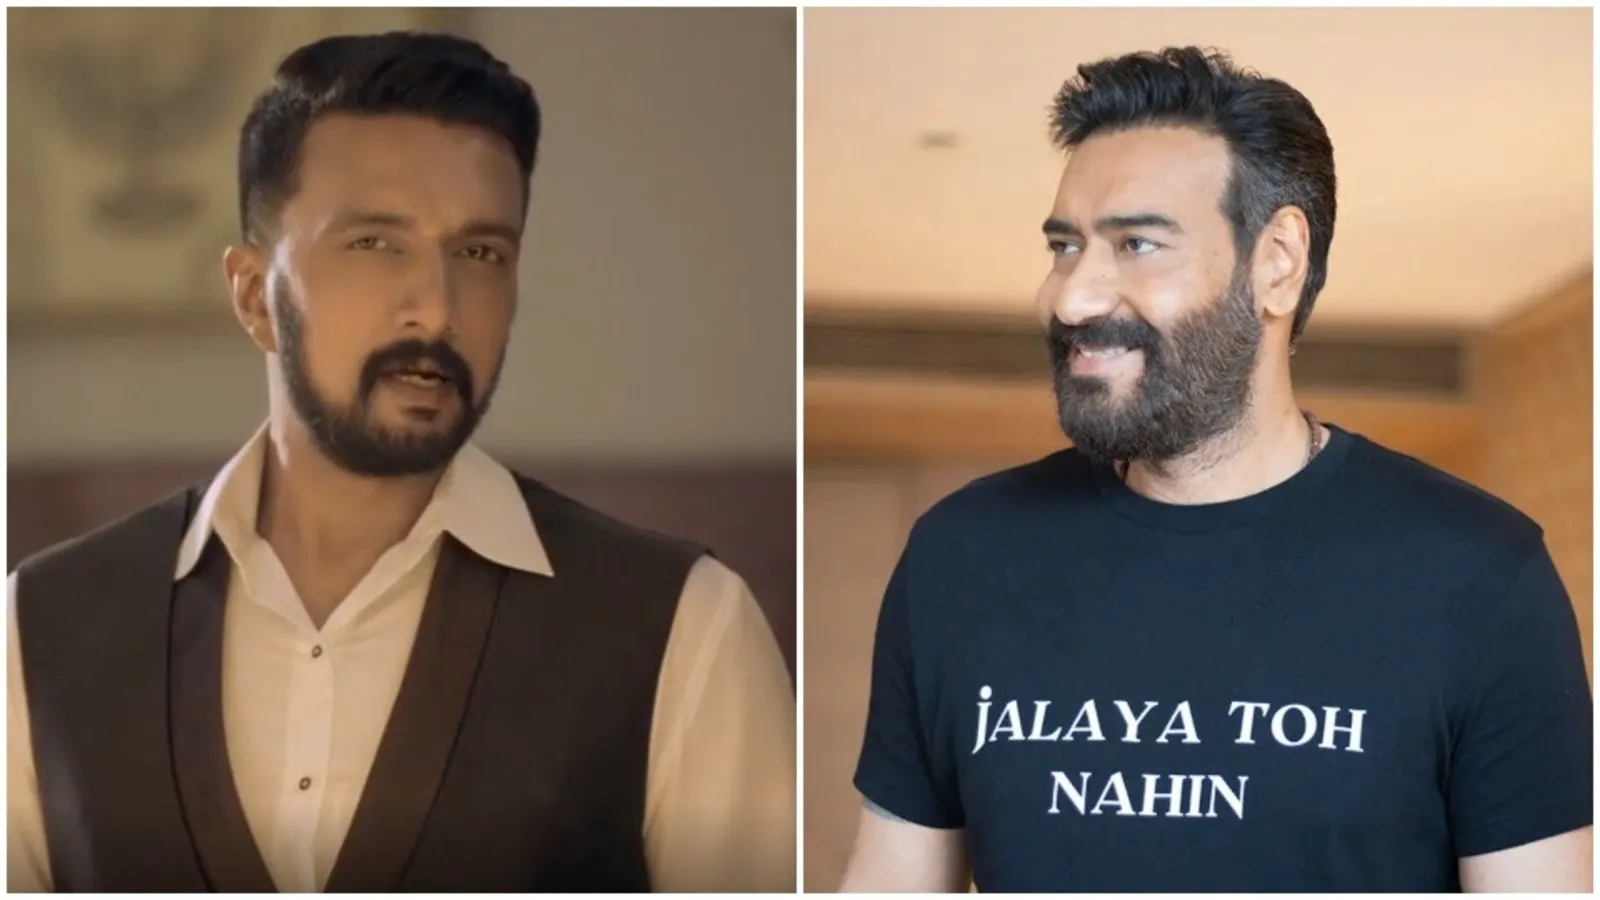 Ajay Devgn reacts to Kiccha Sudeep’s ‘Hindi isn’t our national language’ comment: ‘Why do you dub your films in Hindi?’